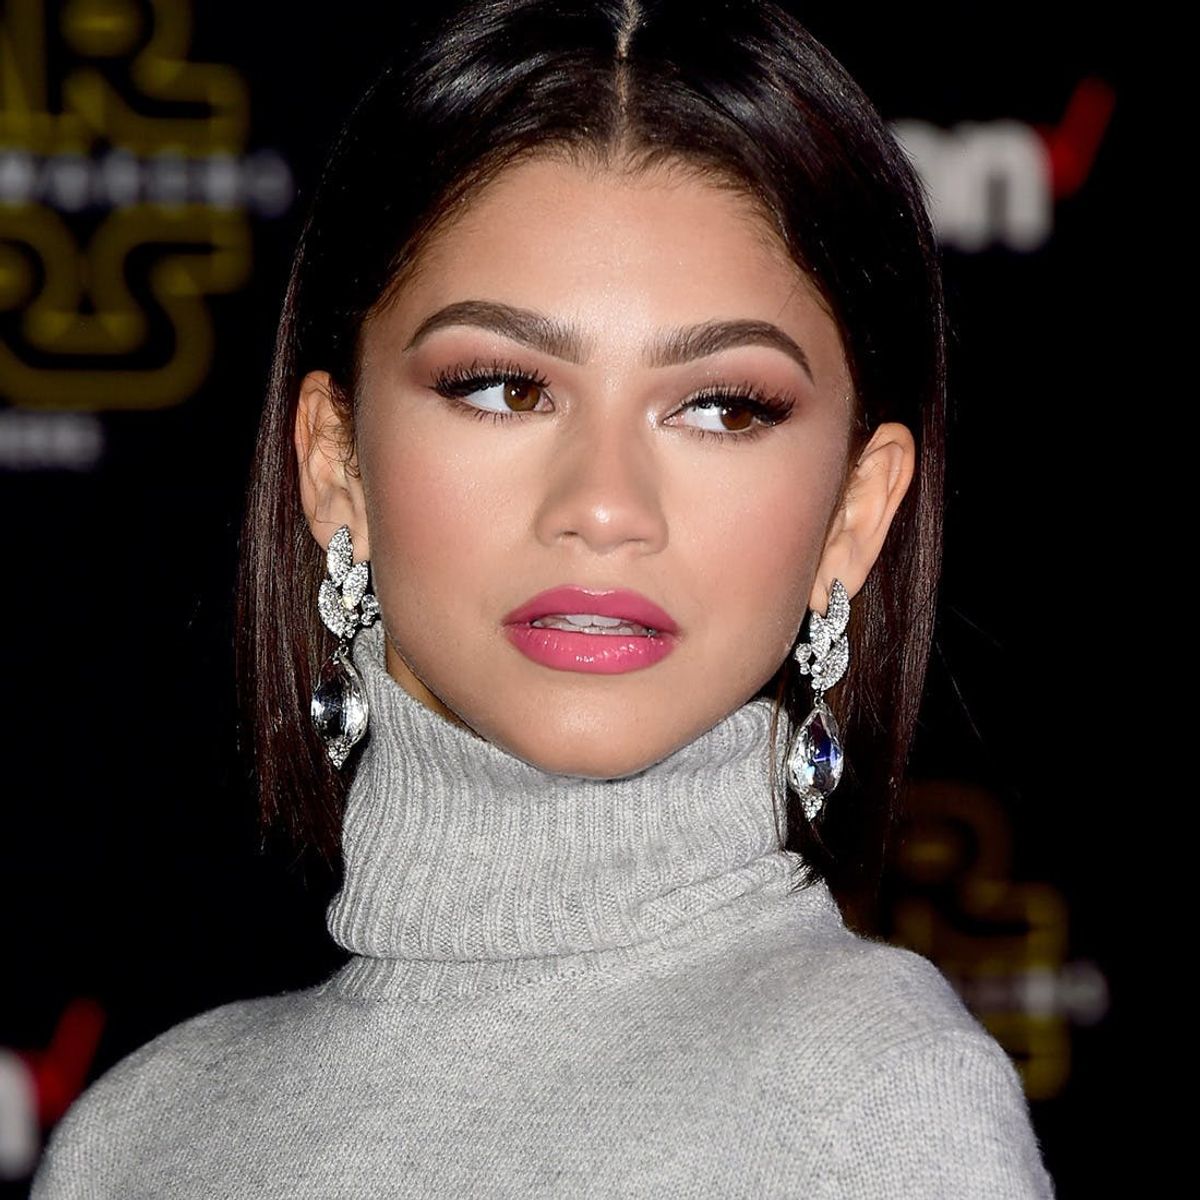 Zendaya Just Schooled Us on How to Dress Up and STILL Be Cozy